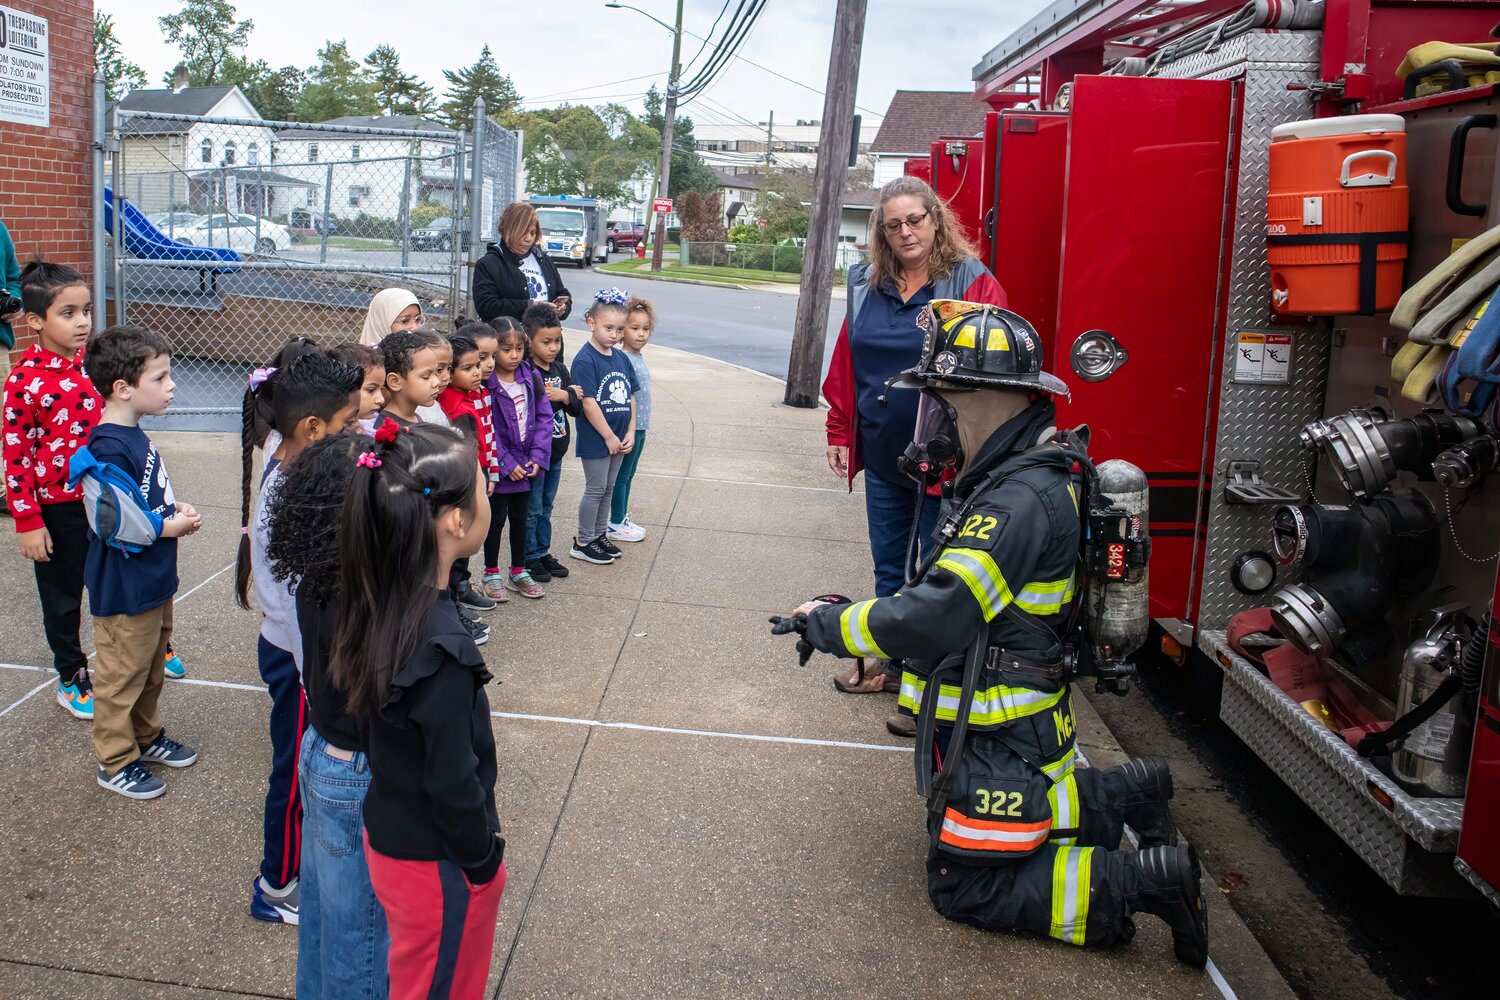 Brooklyn Avenue School students were treated to a visit by the Valley Stream Fire Department Fire Safety and Education Committee, alongside Ladder Company 2. Above, a uniformed firefighter explains the purpose of his equipment.